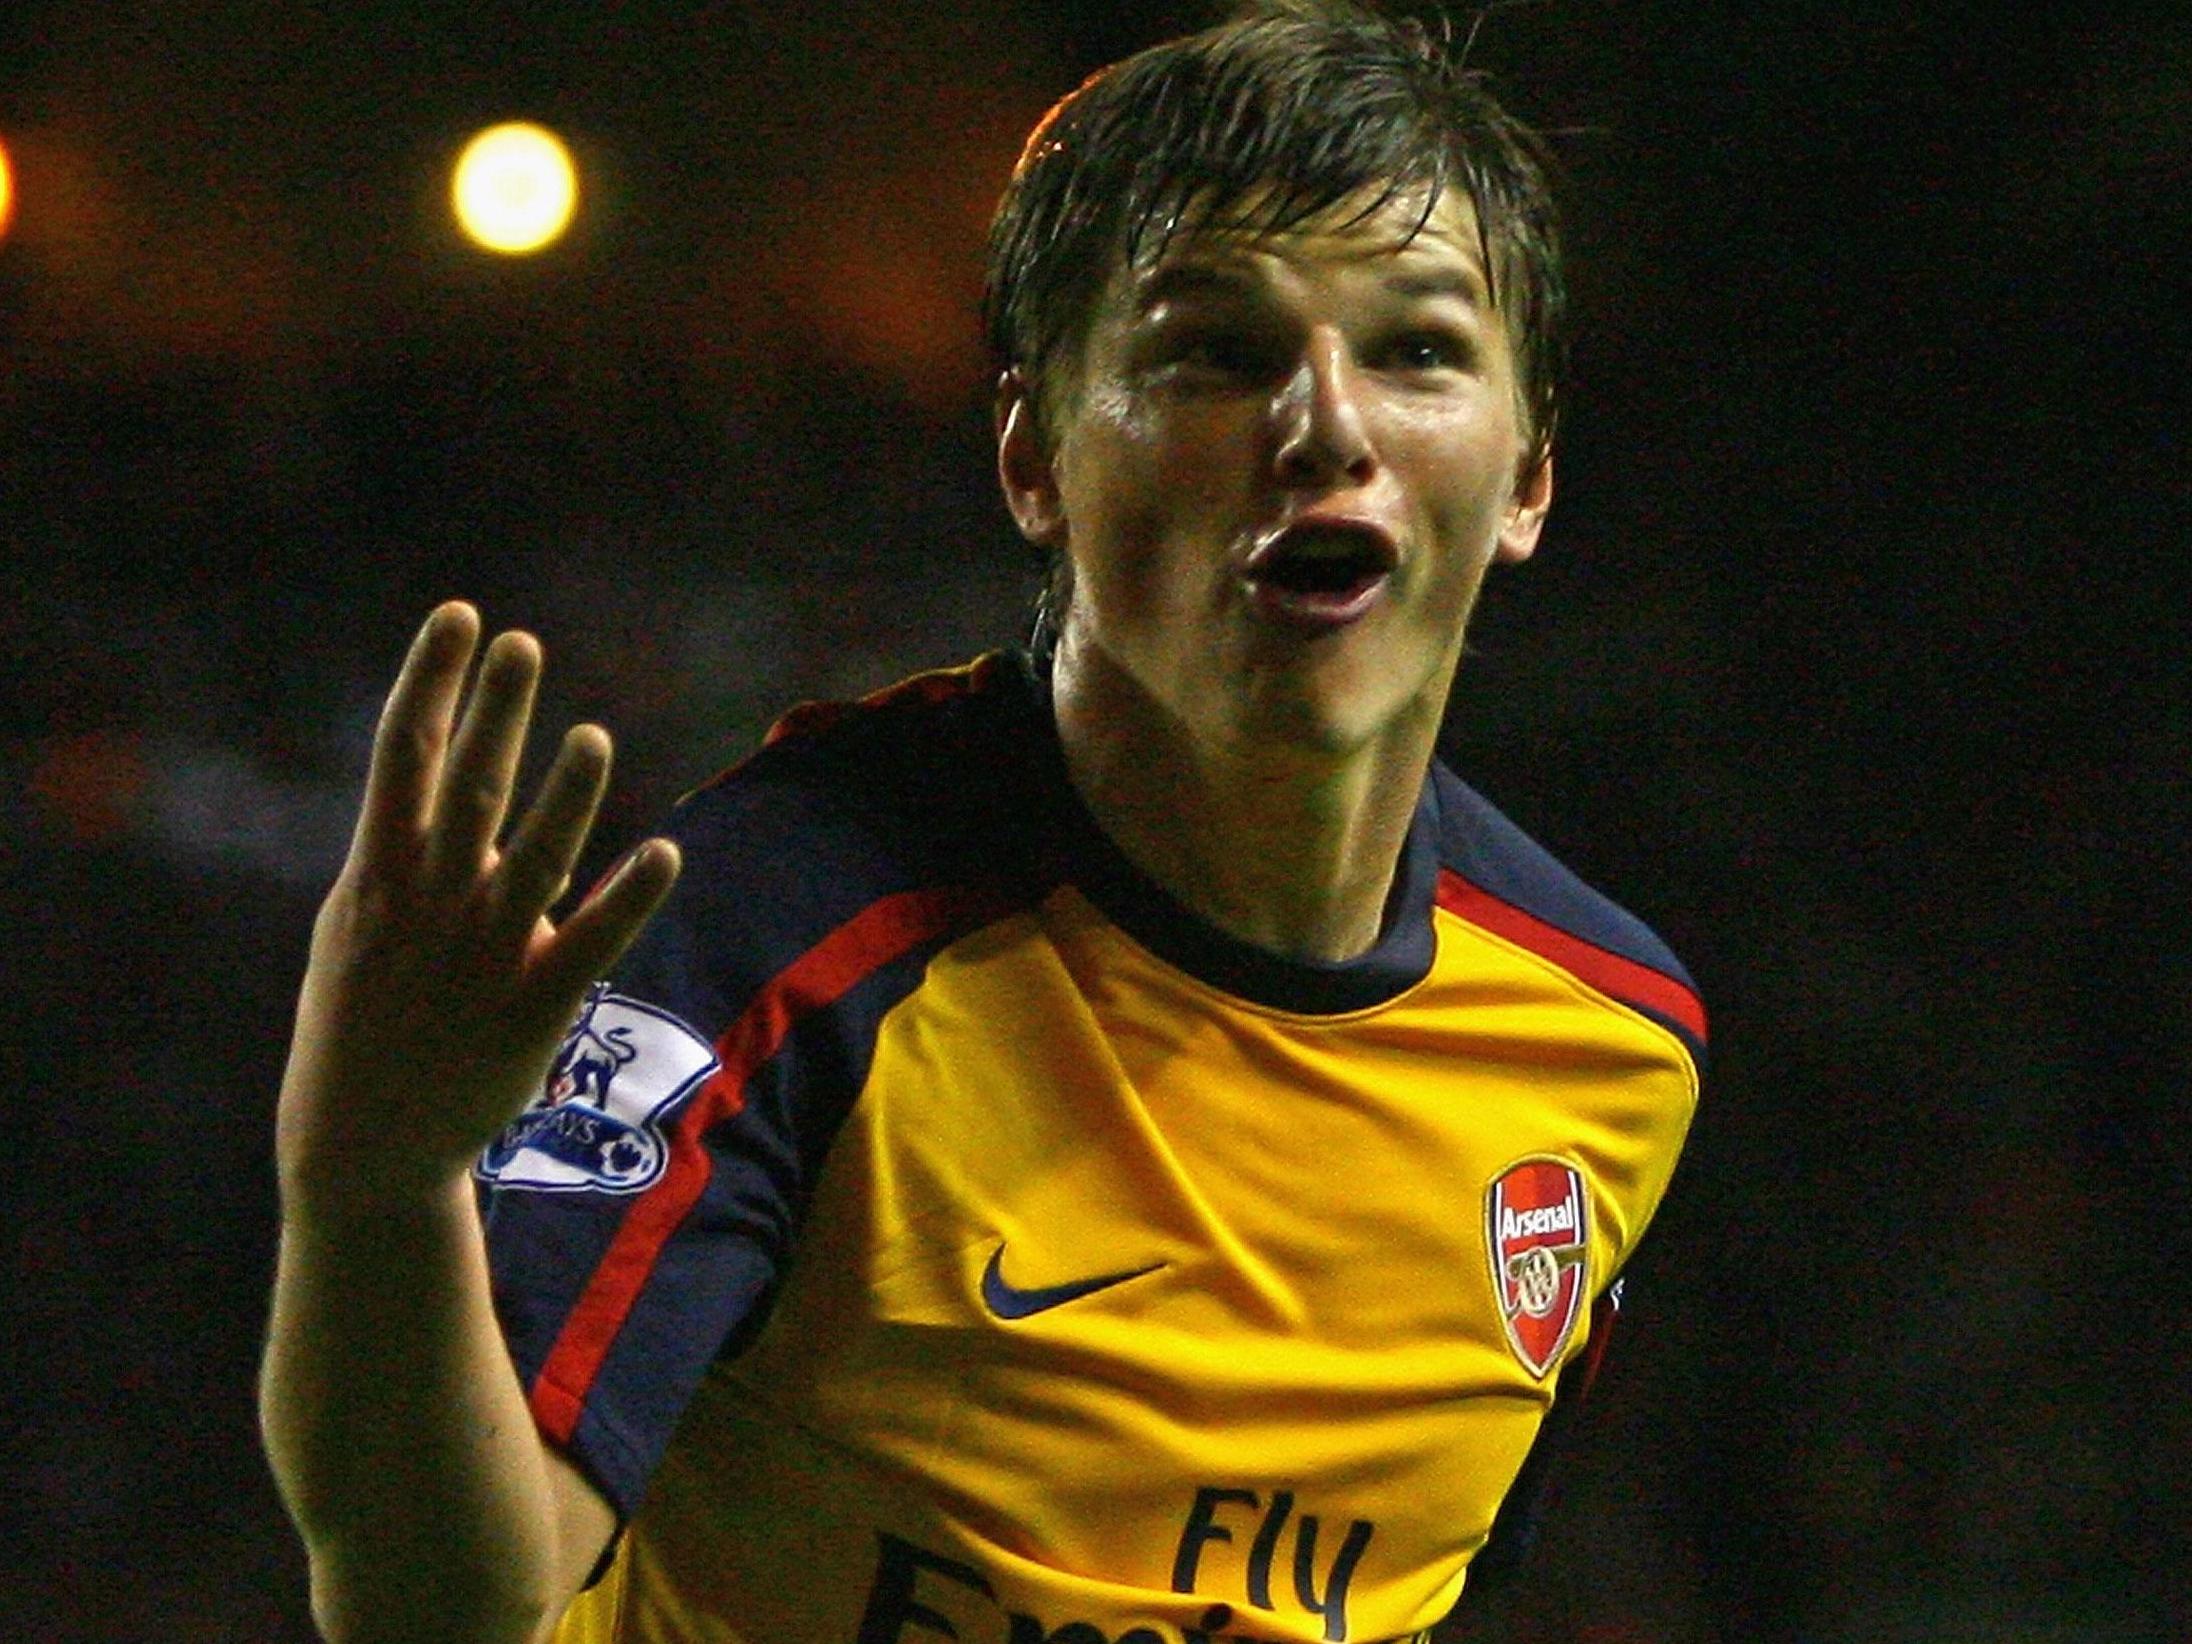 Arshavin's red hot run was all too brief for Arsenal